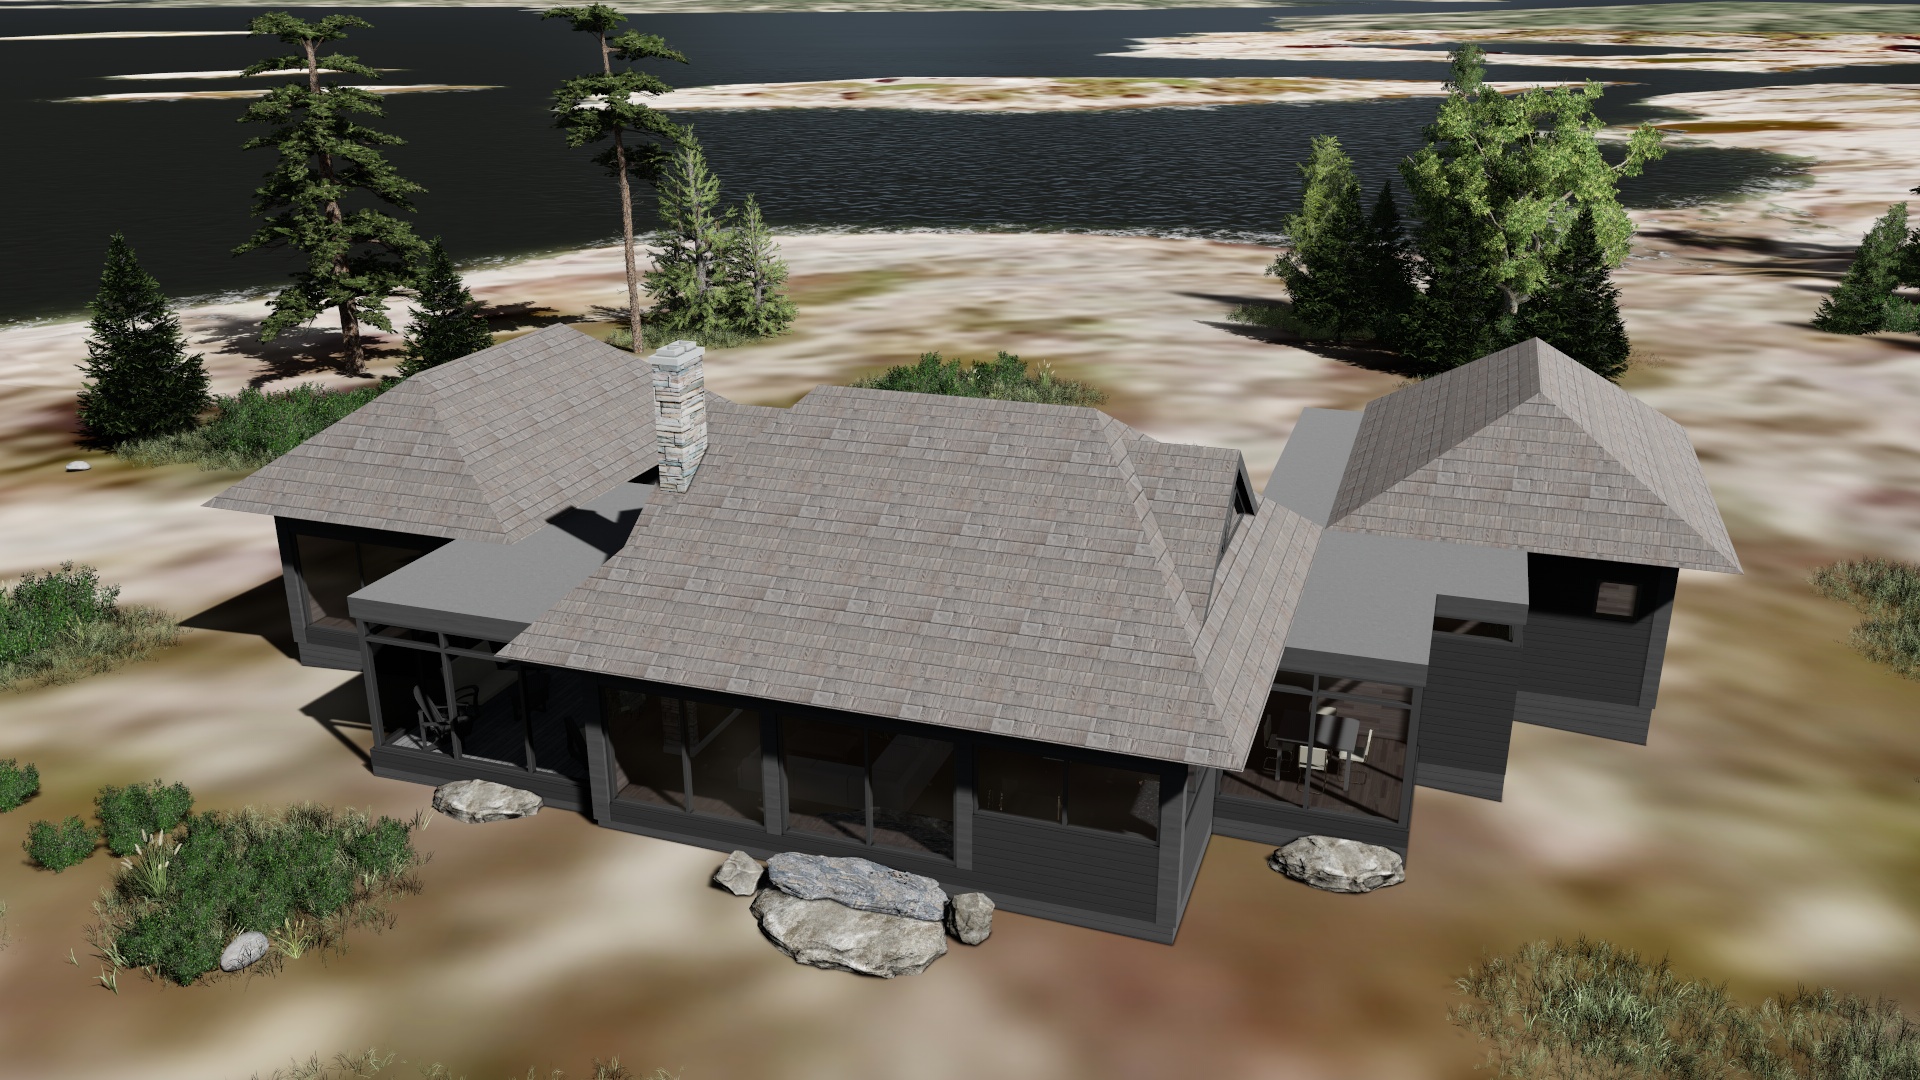  OPTION 3 - HIP ROOFS 